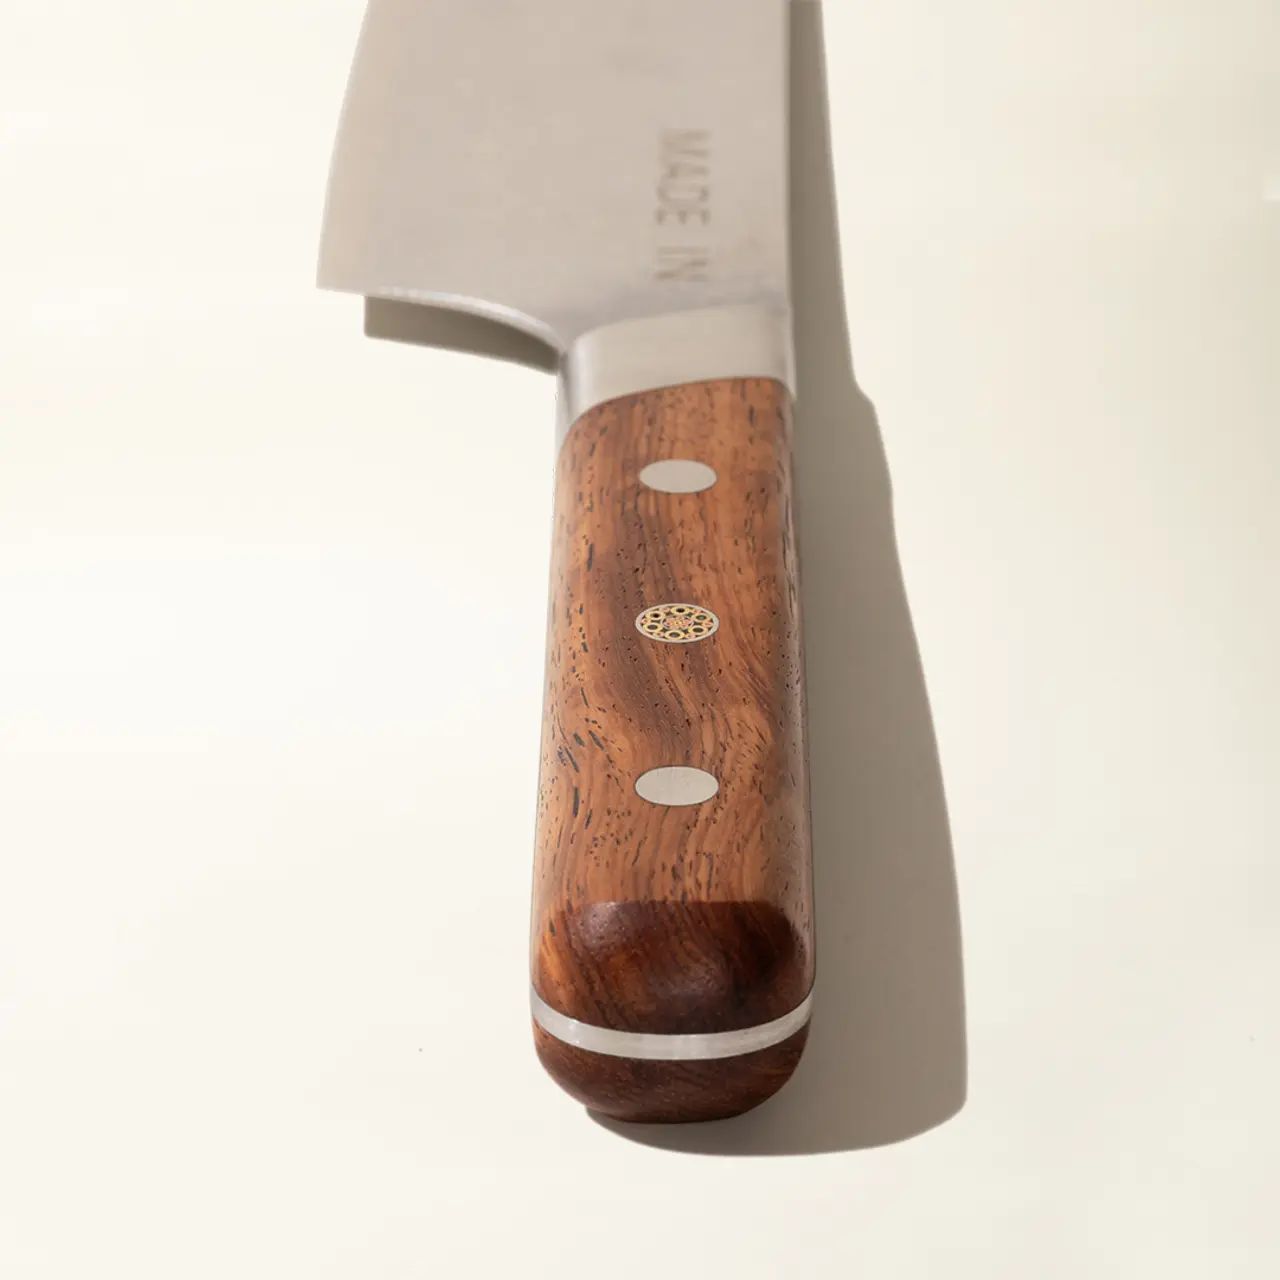 A close-up of a chef's knife with a wooden handle resting on a light surface, highlighting its blade and brand stamp.